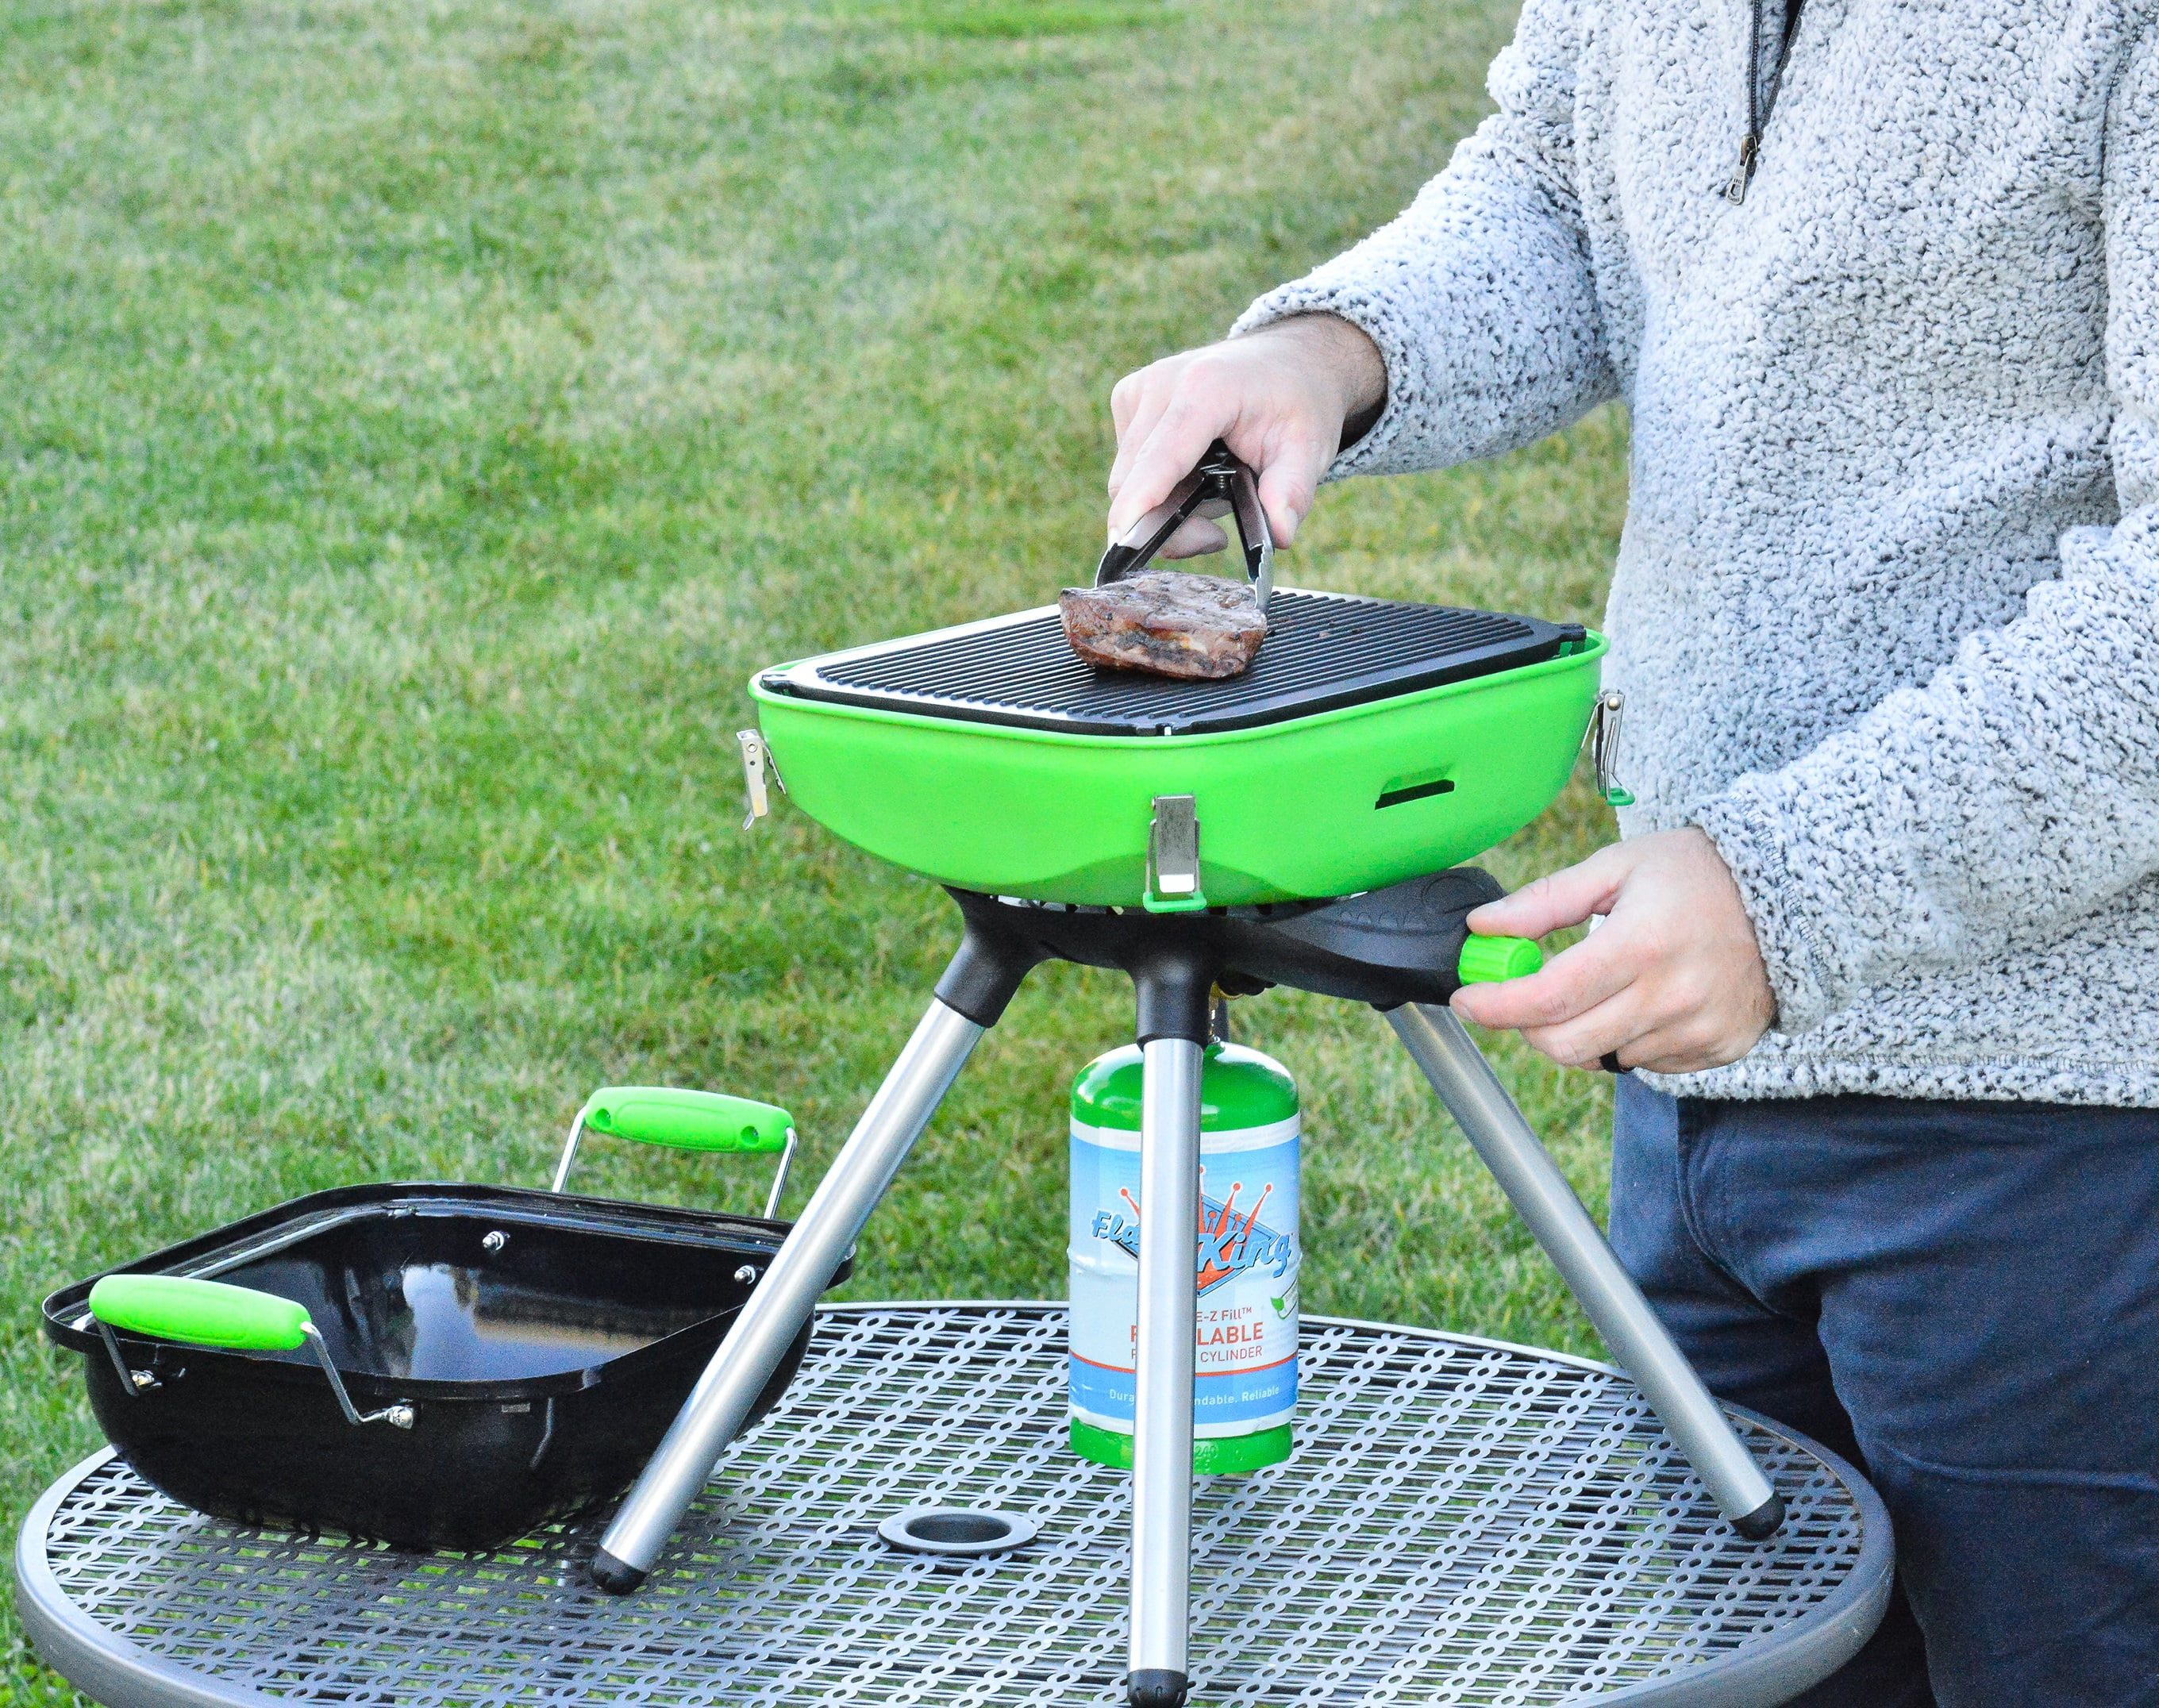 Flame King Flat Top Portable Propane Cast Iron Grill Griddle